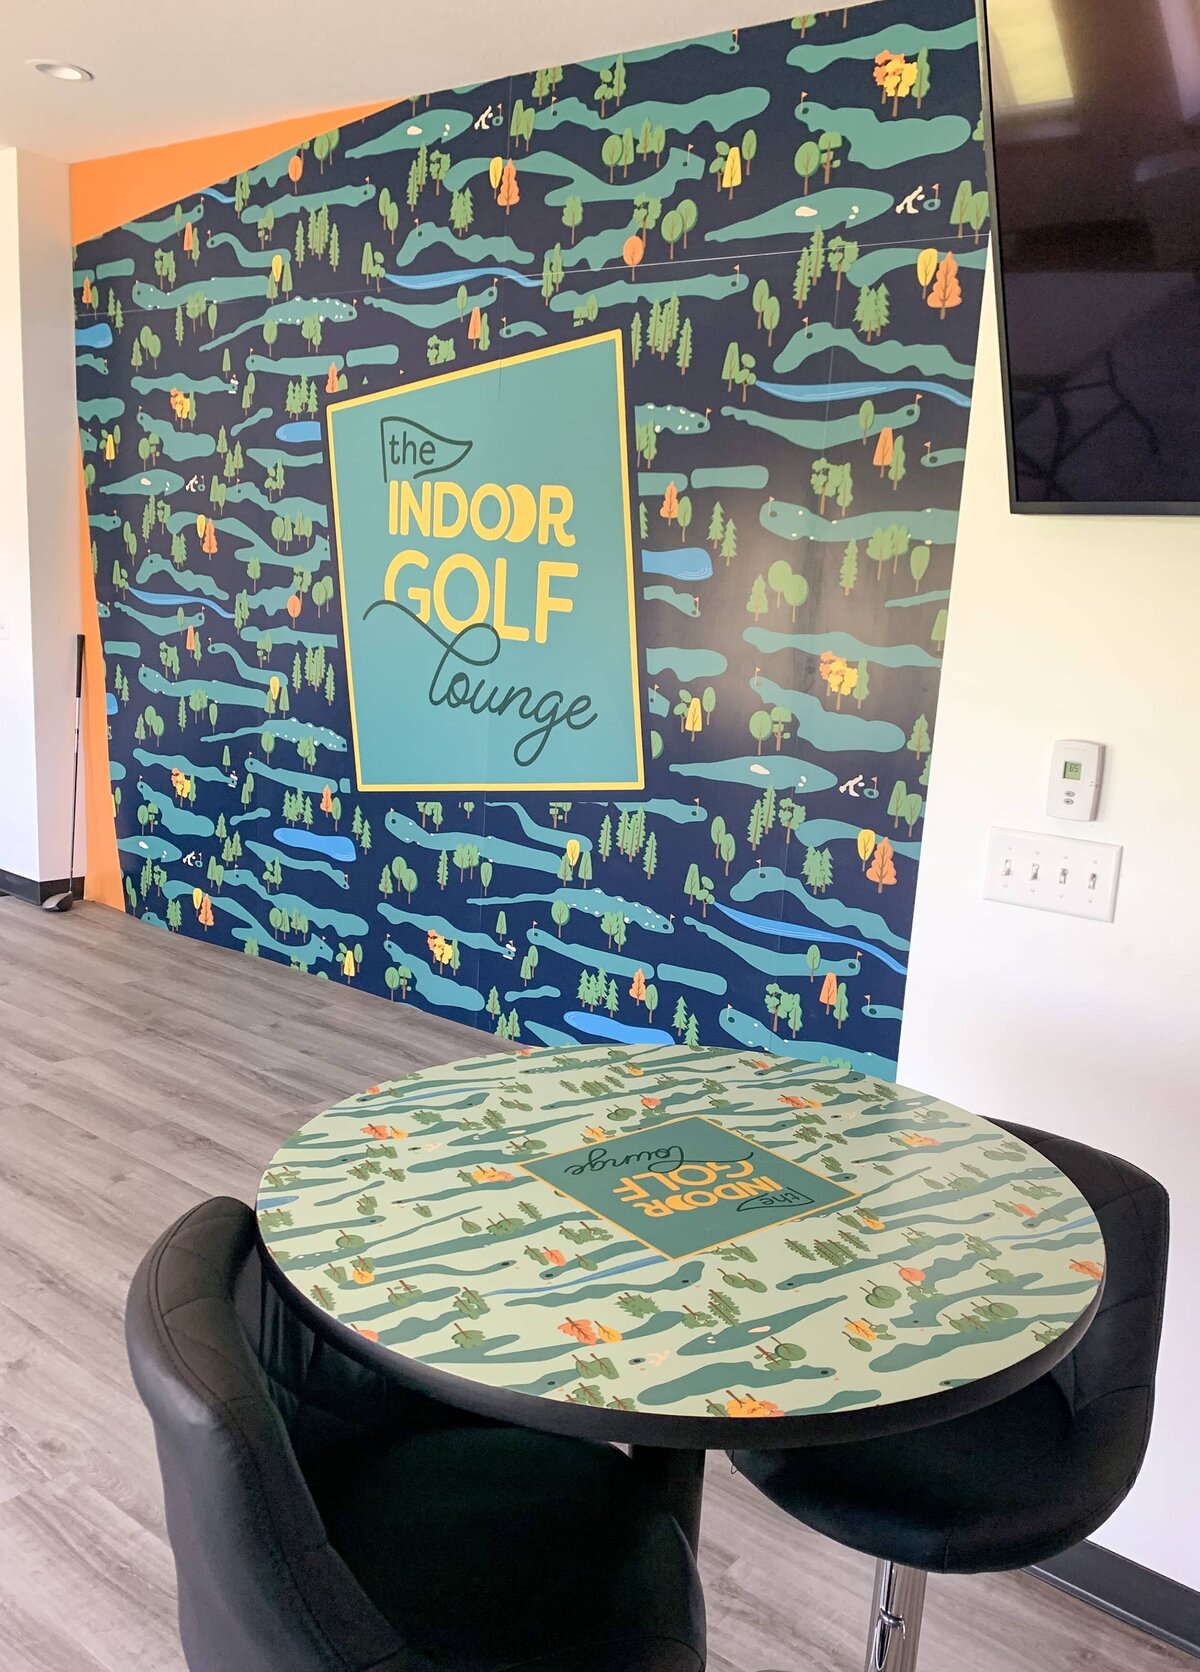 A round table with The Indoor Golf Lounge brand pattern and logo printed on the top sits in front of a large wall featuring the same pattern and logo, but with a darker background color